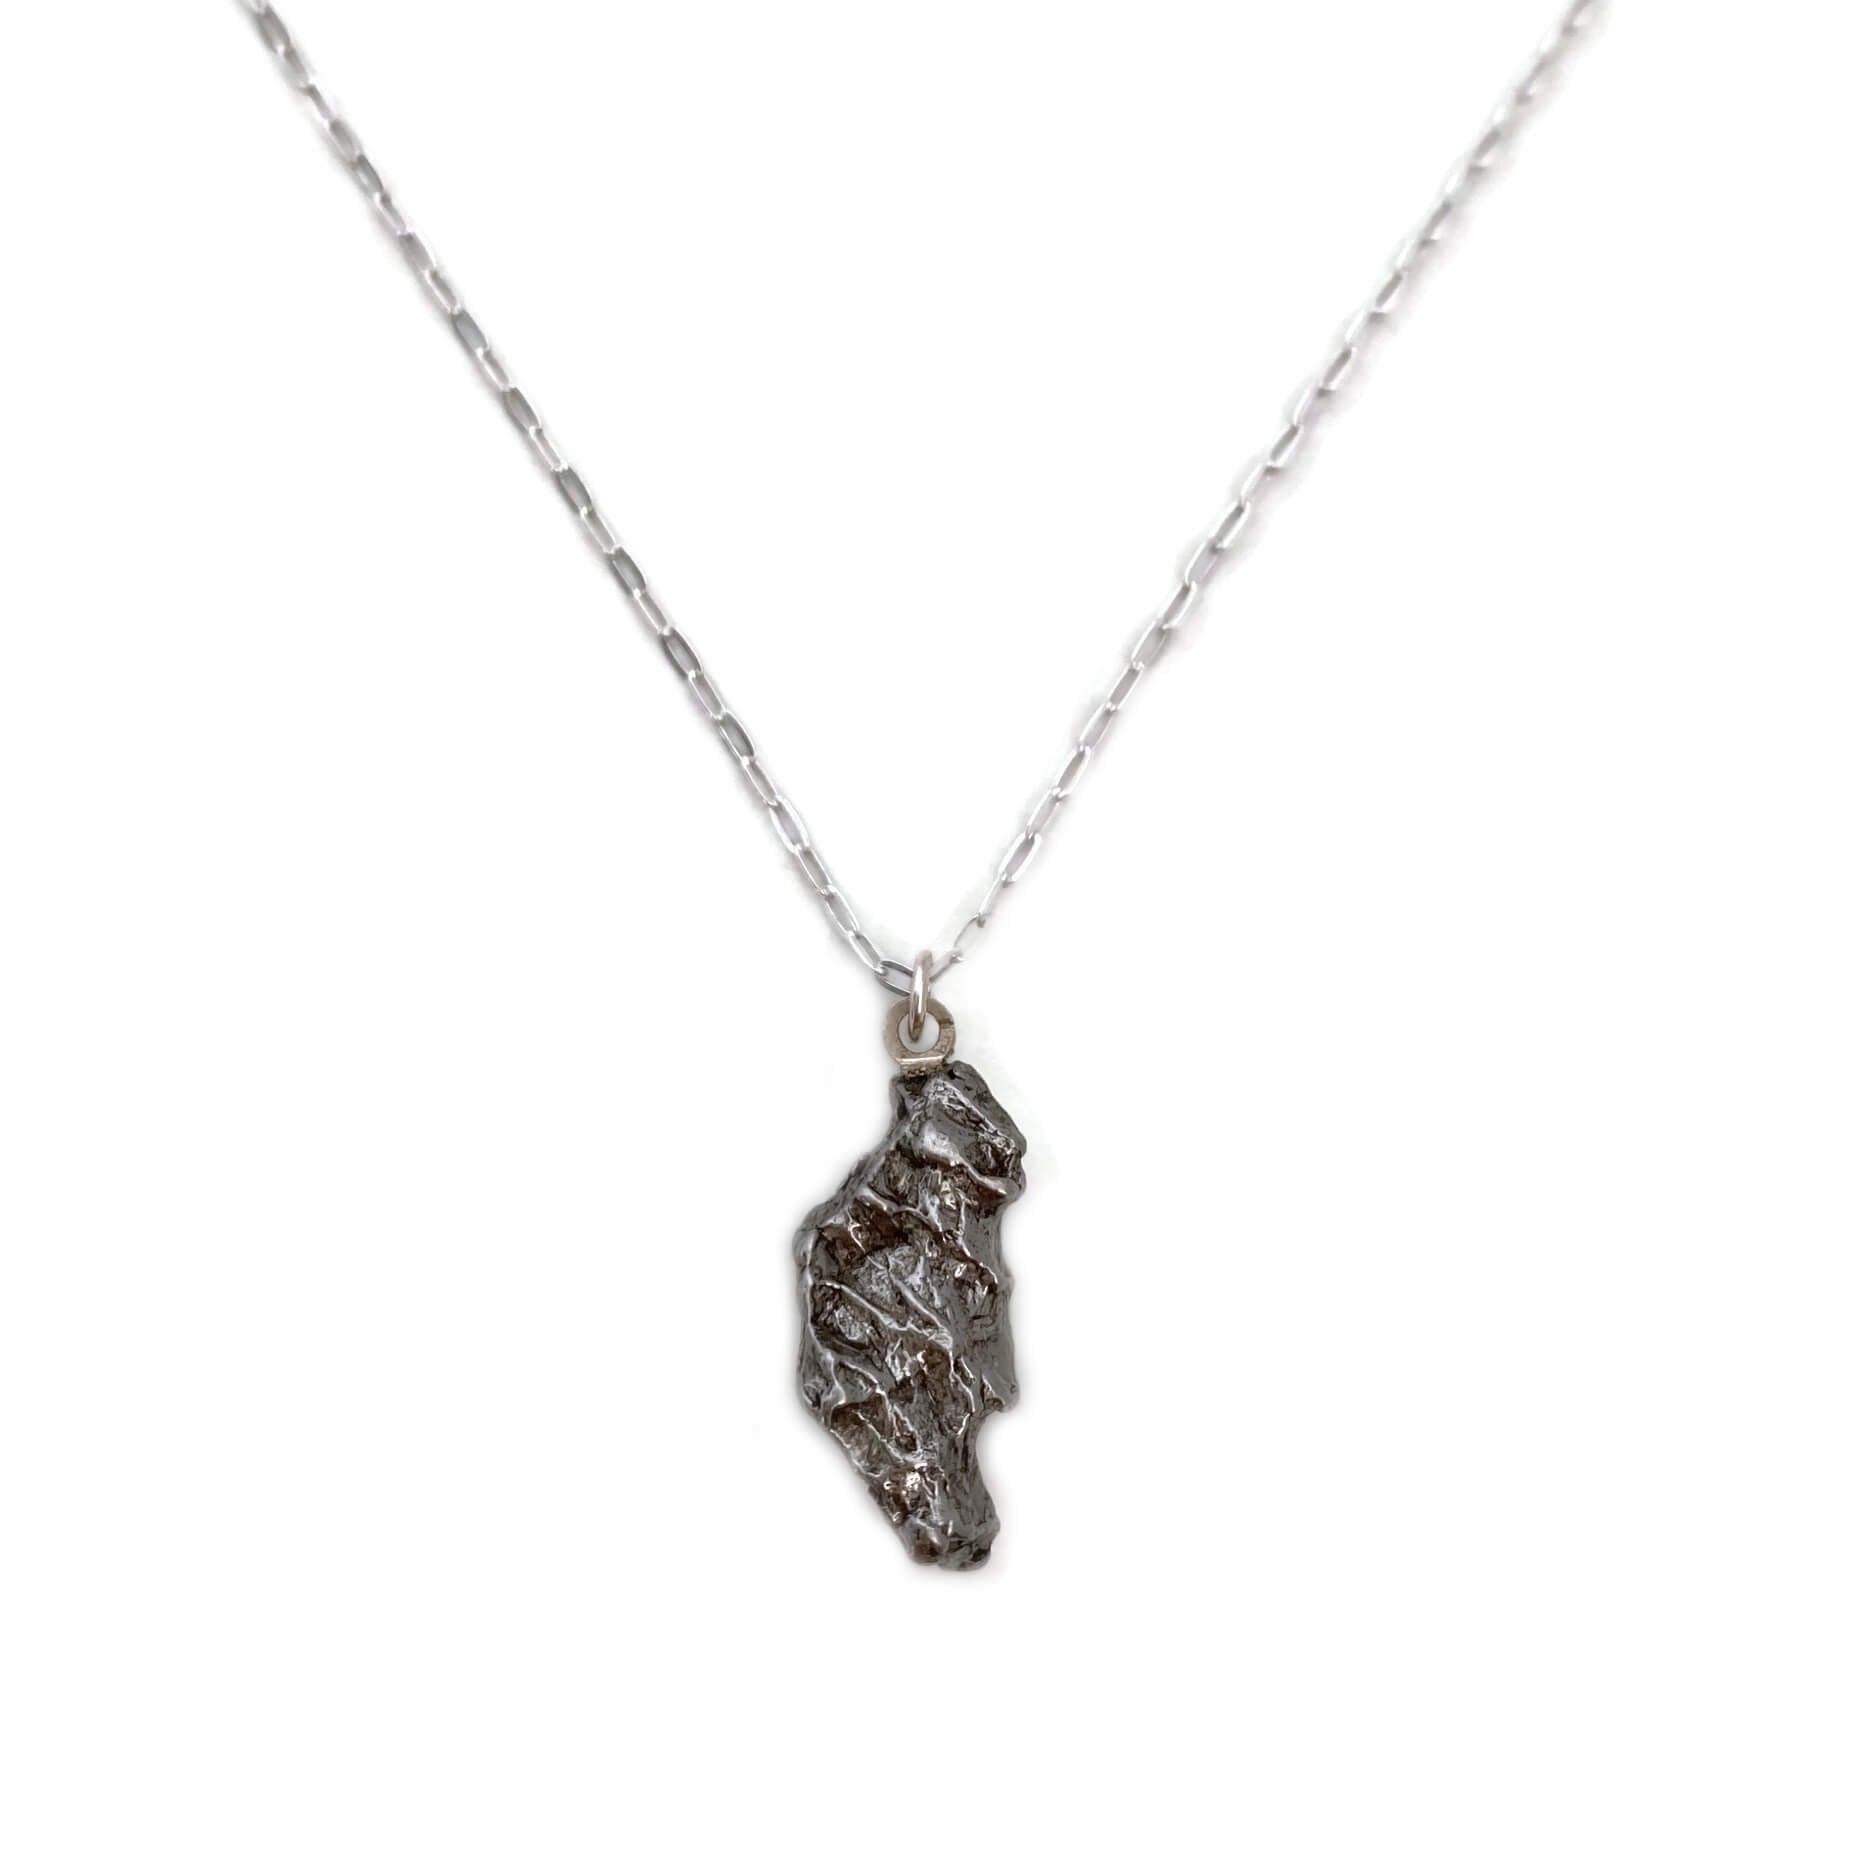 This meteorite necklace is made from a genuine piece of meteorite that crashed to earth near a place called Campo del Cielo in Argentina.  Studies have shown that the meteorite fell to earth around 4,500 years ago in South America. 